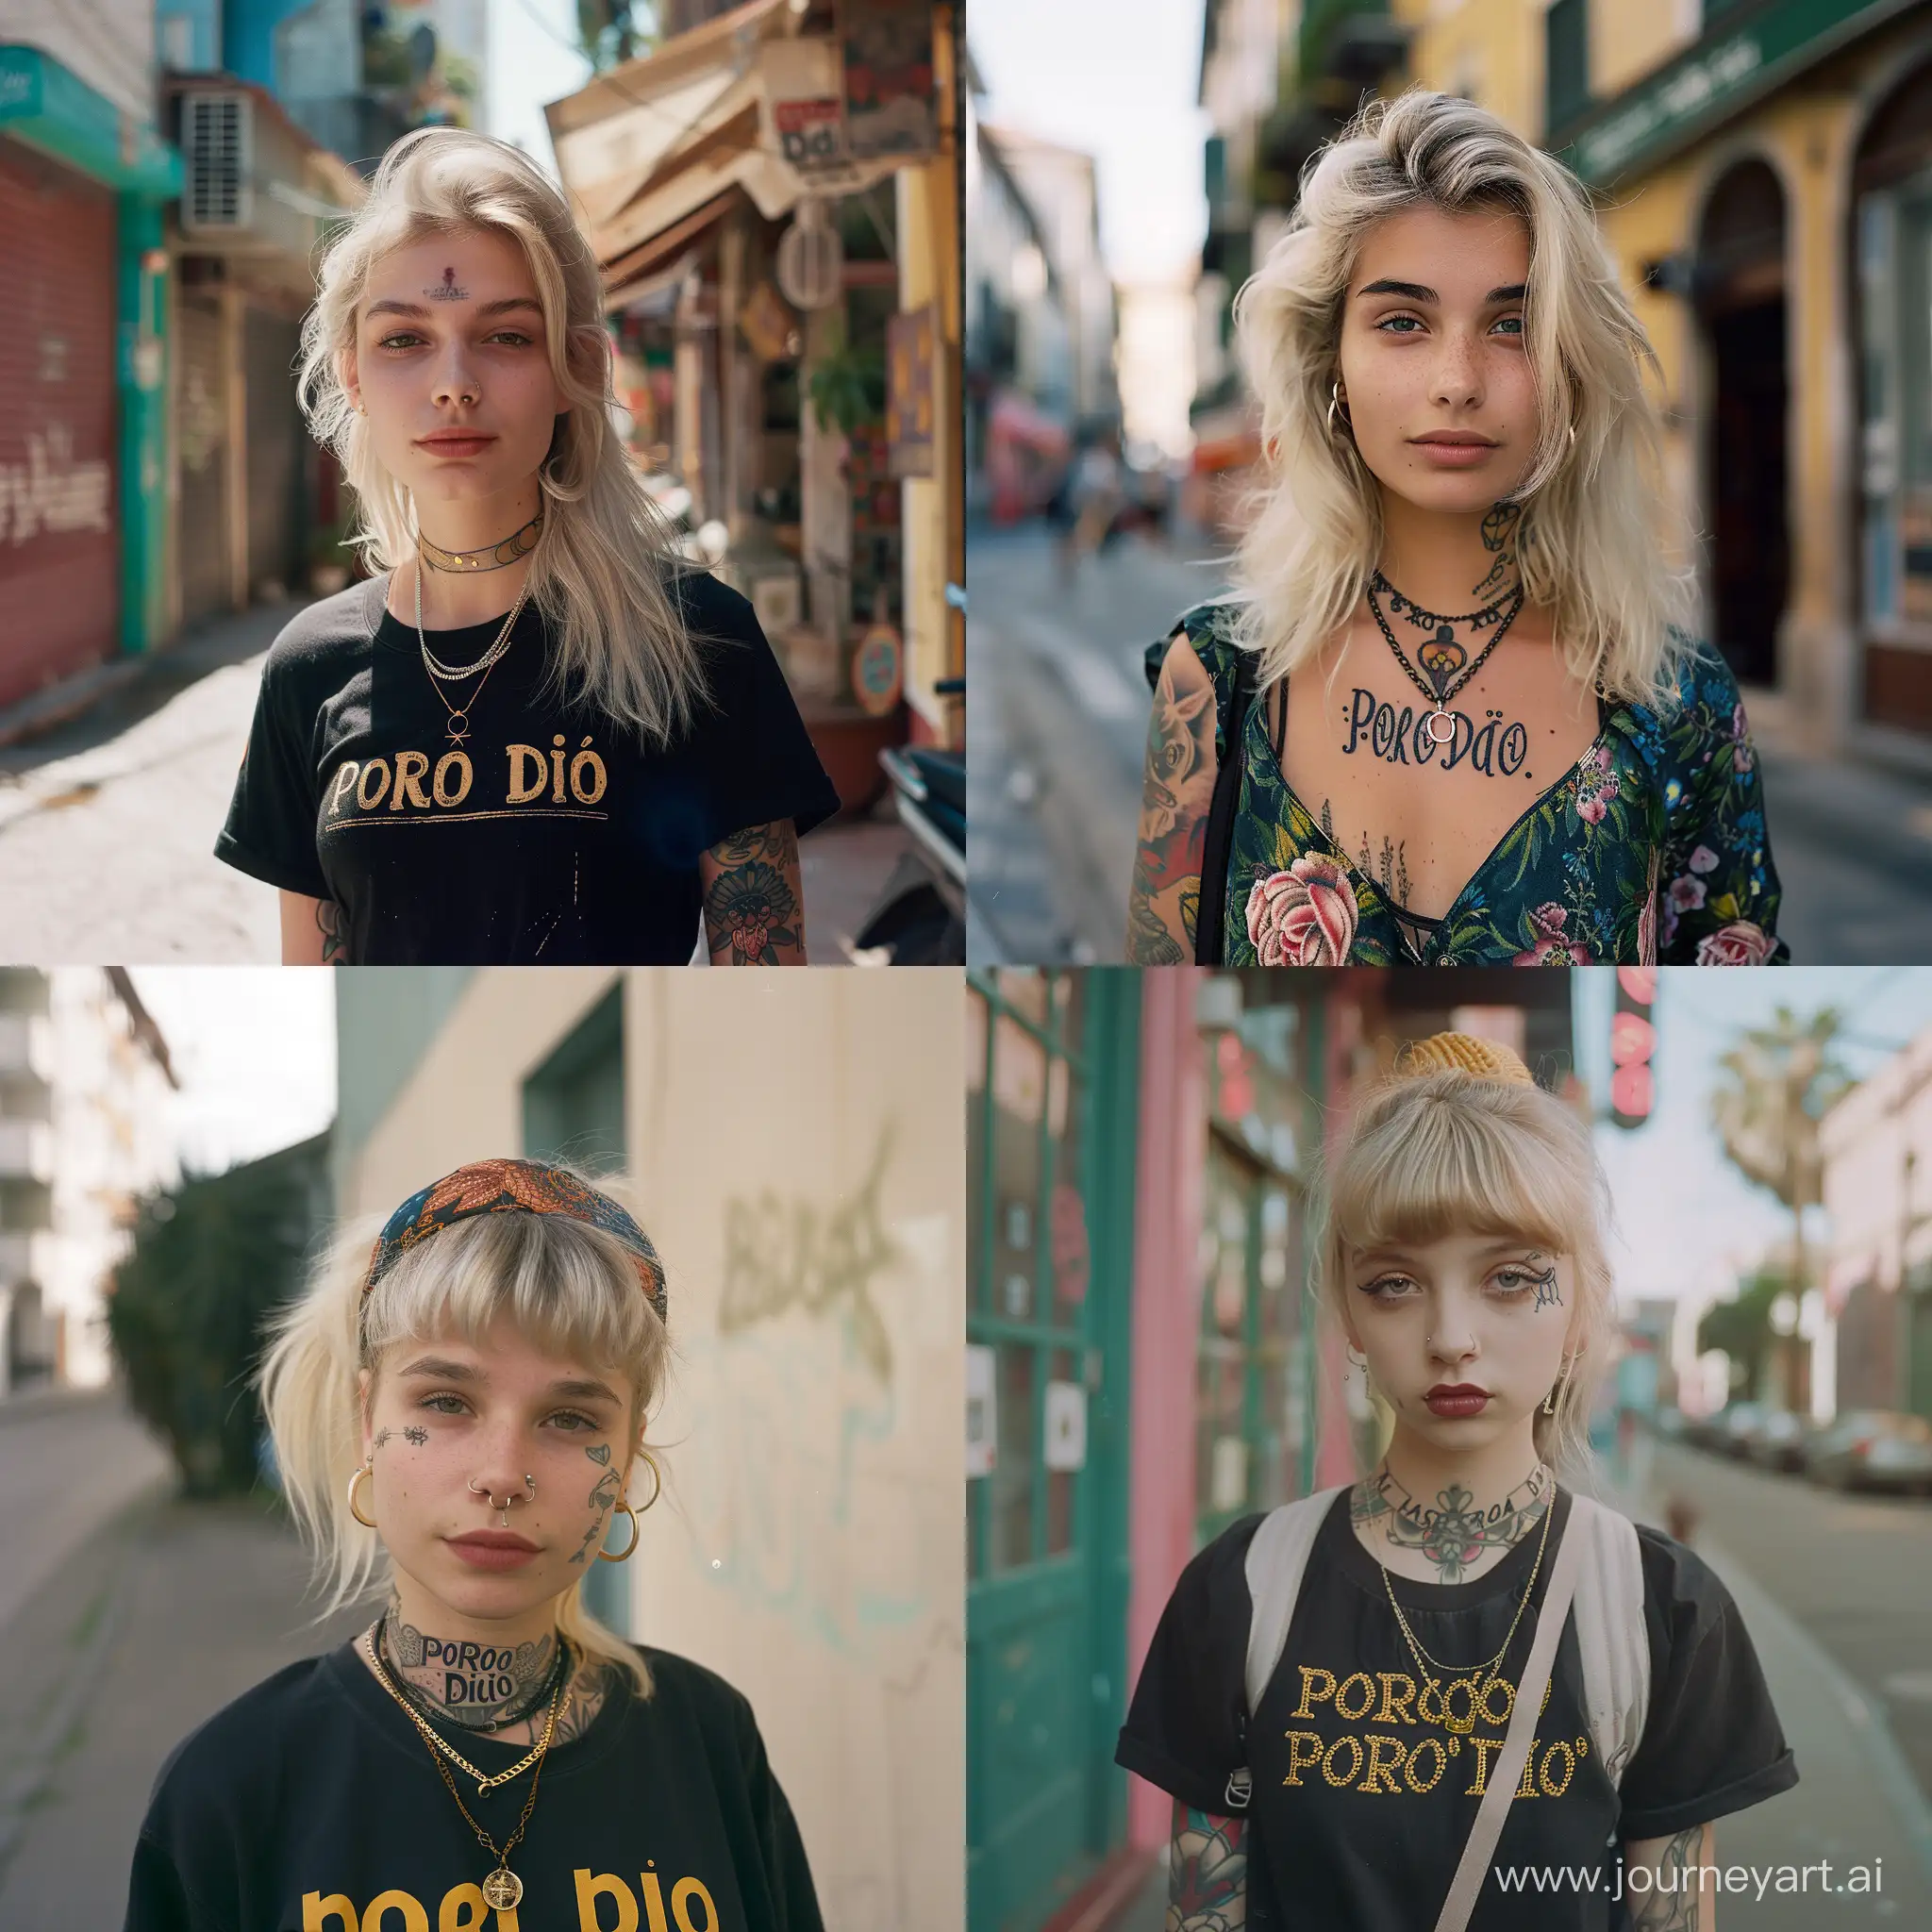 street photography, a young woman with blonde hair, with tattoo saying "porco dio", hippie fashion, captured by hasselblad X1D  --style raw